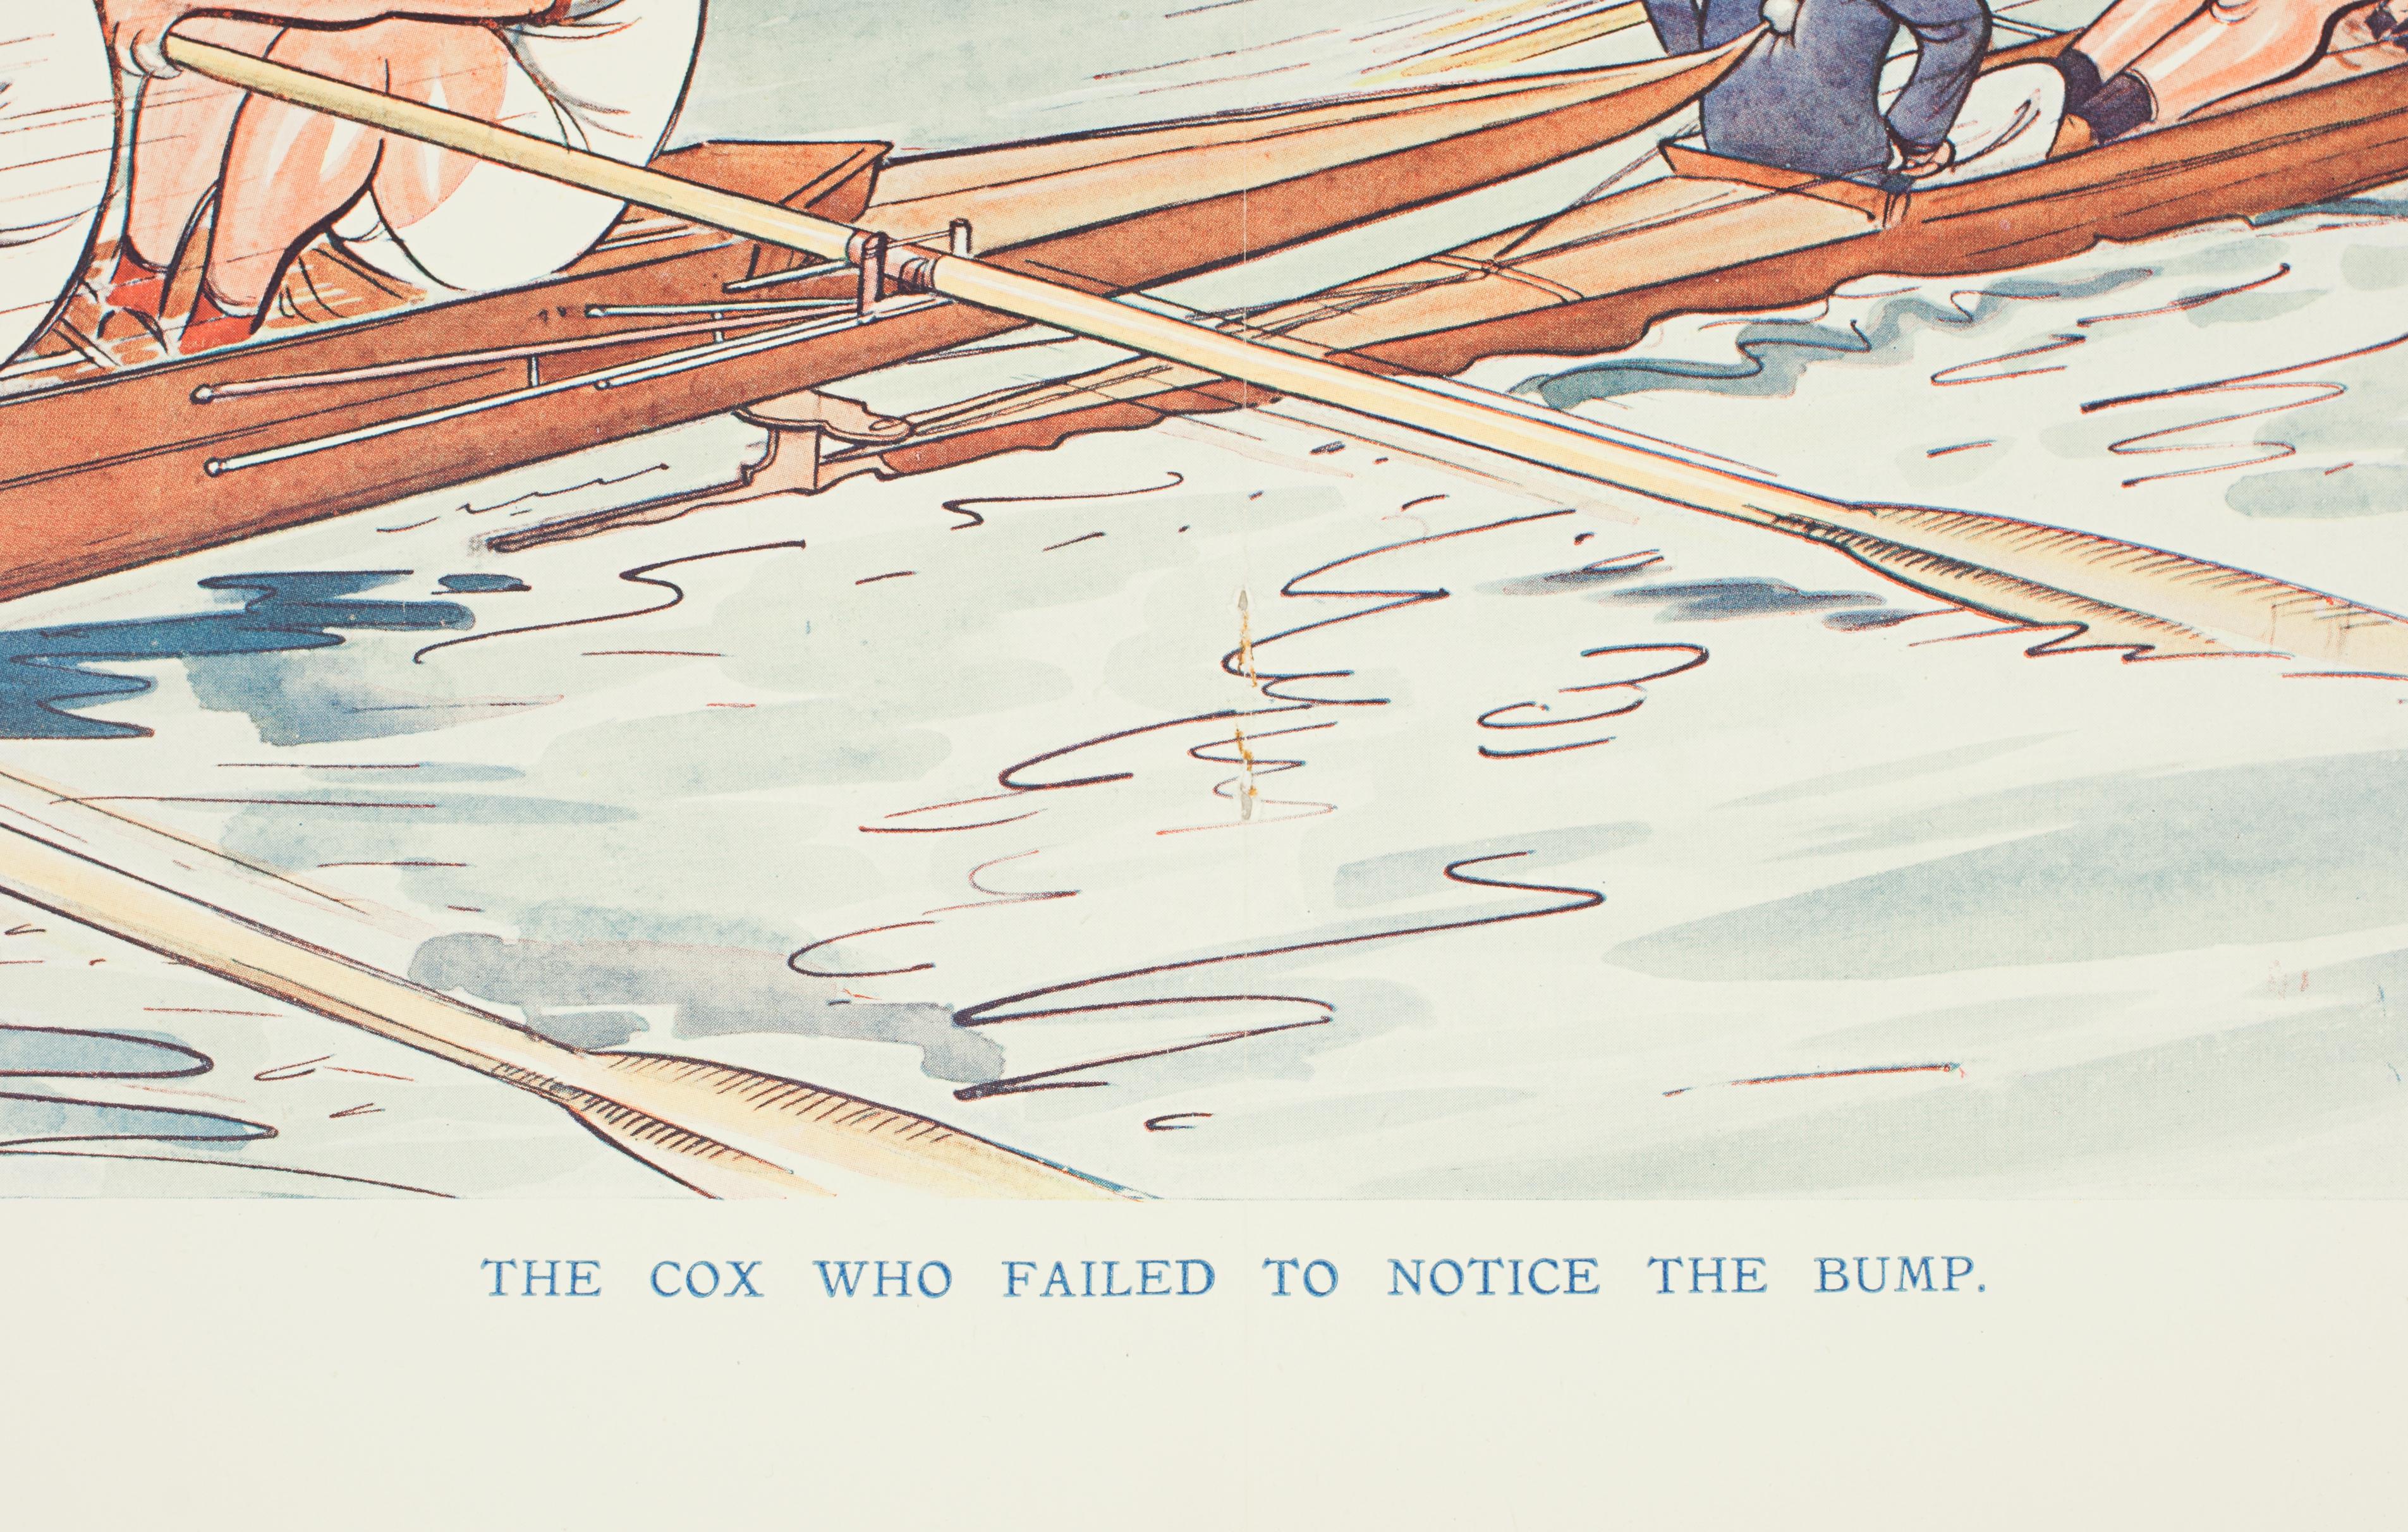 Sporting Art Rowing Print, The Cox Who Failed To Notice The Bump, H M Bateman